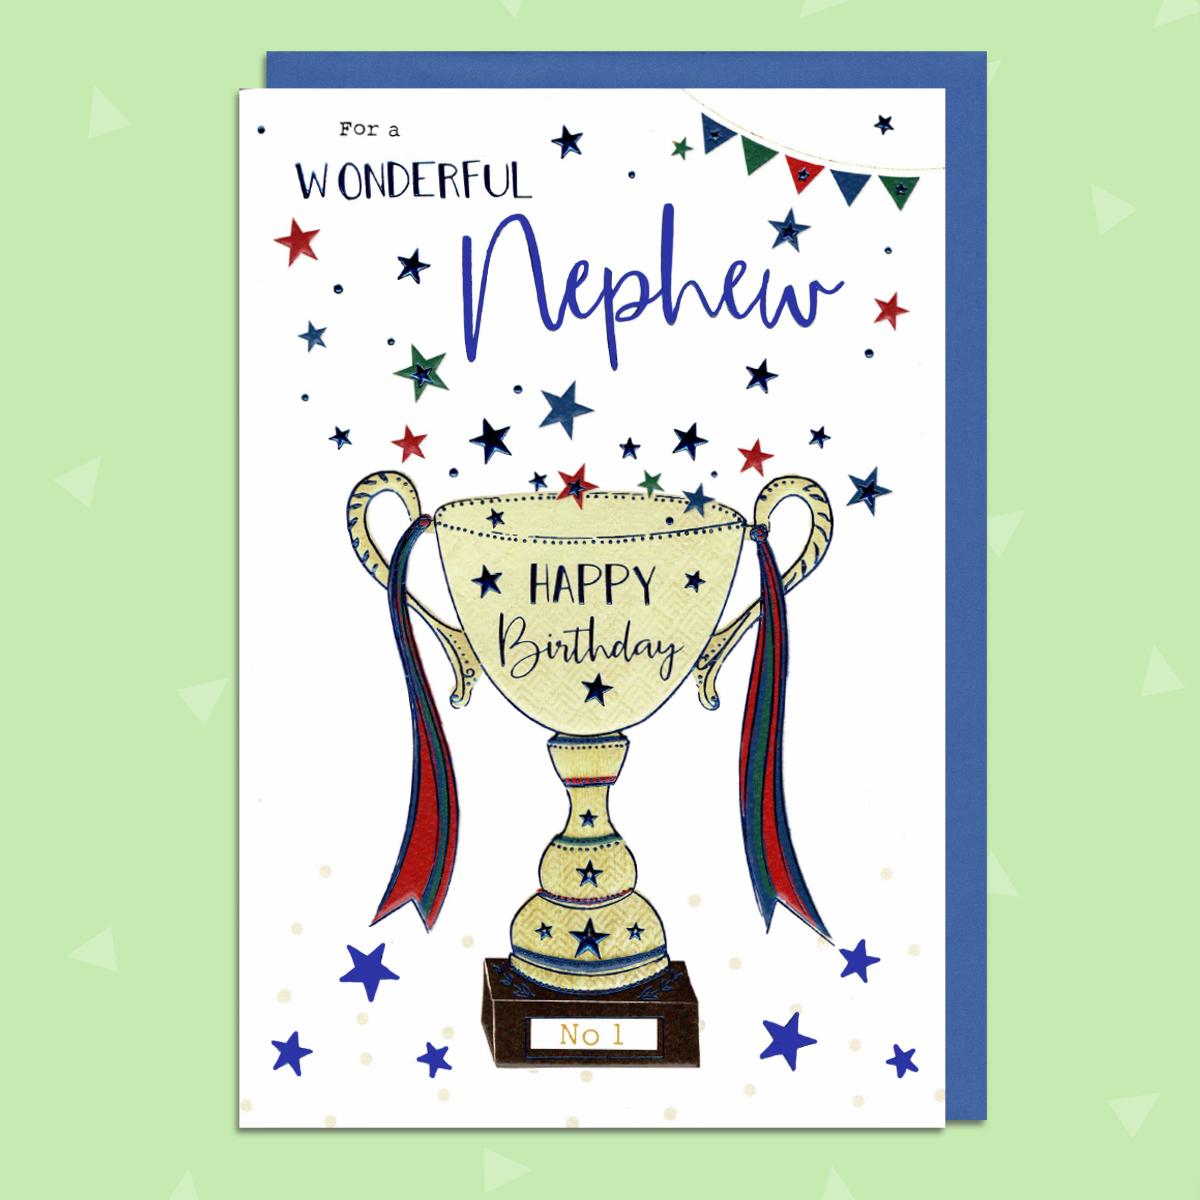 Nephew Birthday Card Showing A Birthday Trophy Decorated In Red And Blue Ribbons